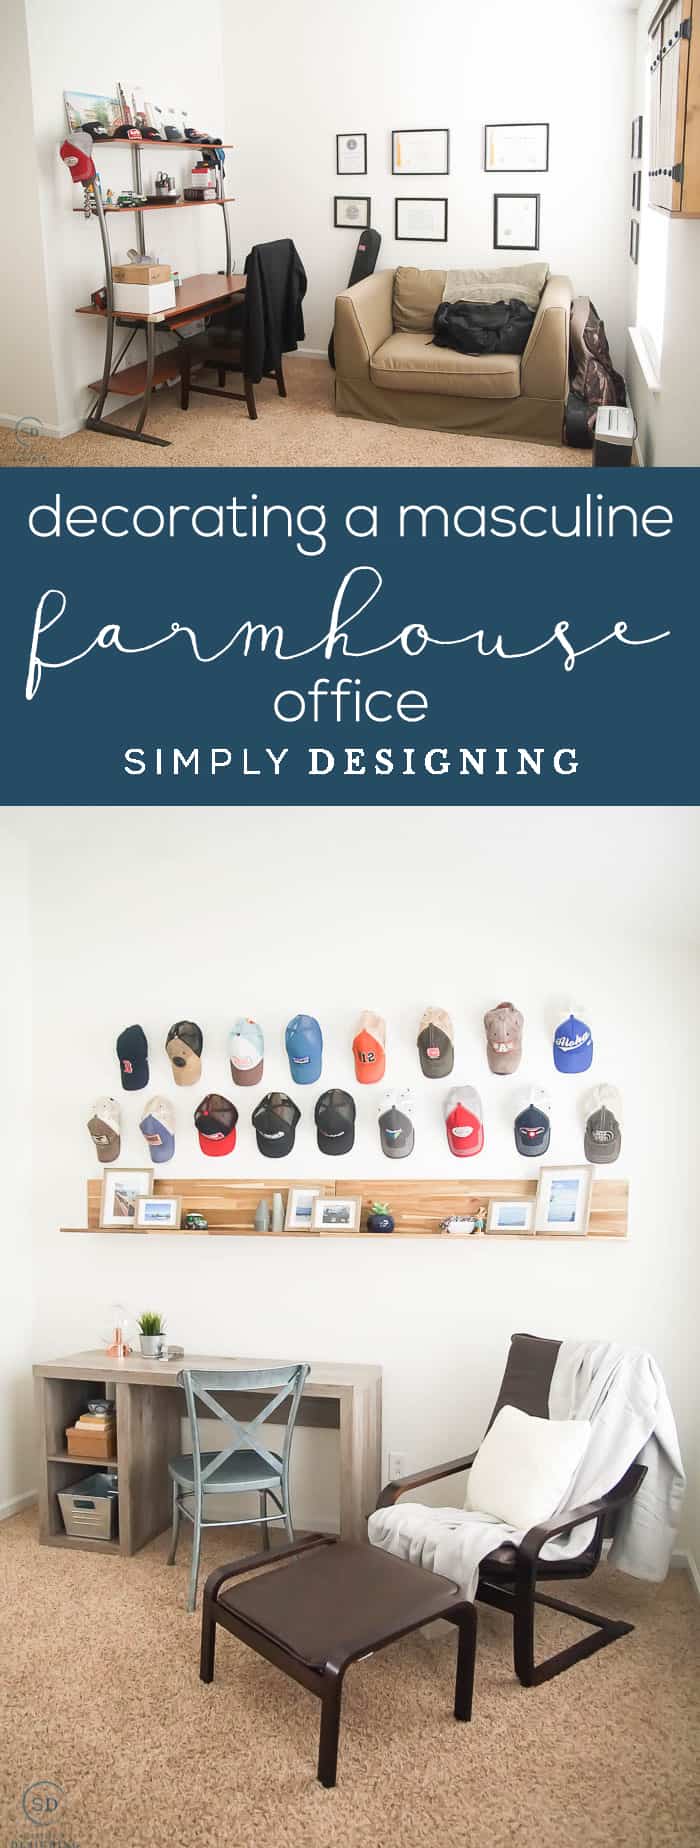 Decorating a Man's Office with Farmhouse Design - before and after - farmhouse office - masculine office - farmhouse desk - industrial farmhouse decor